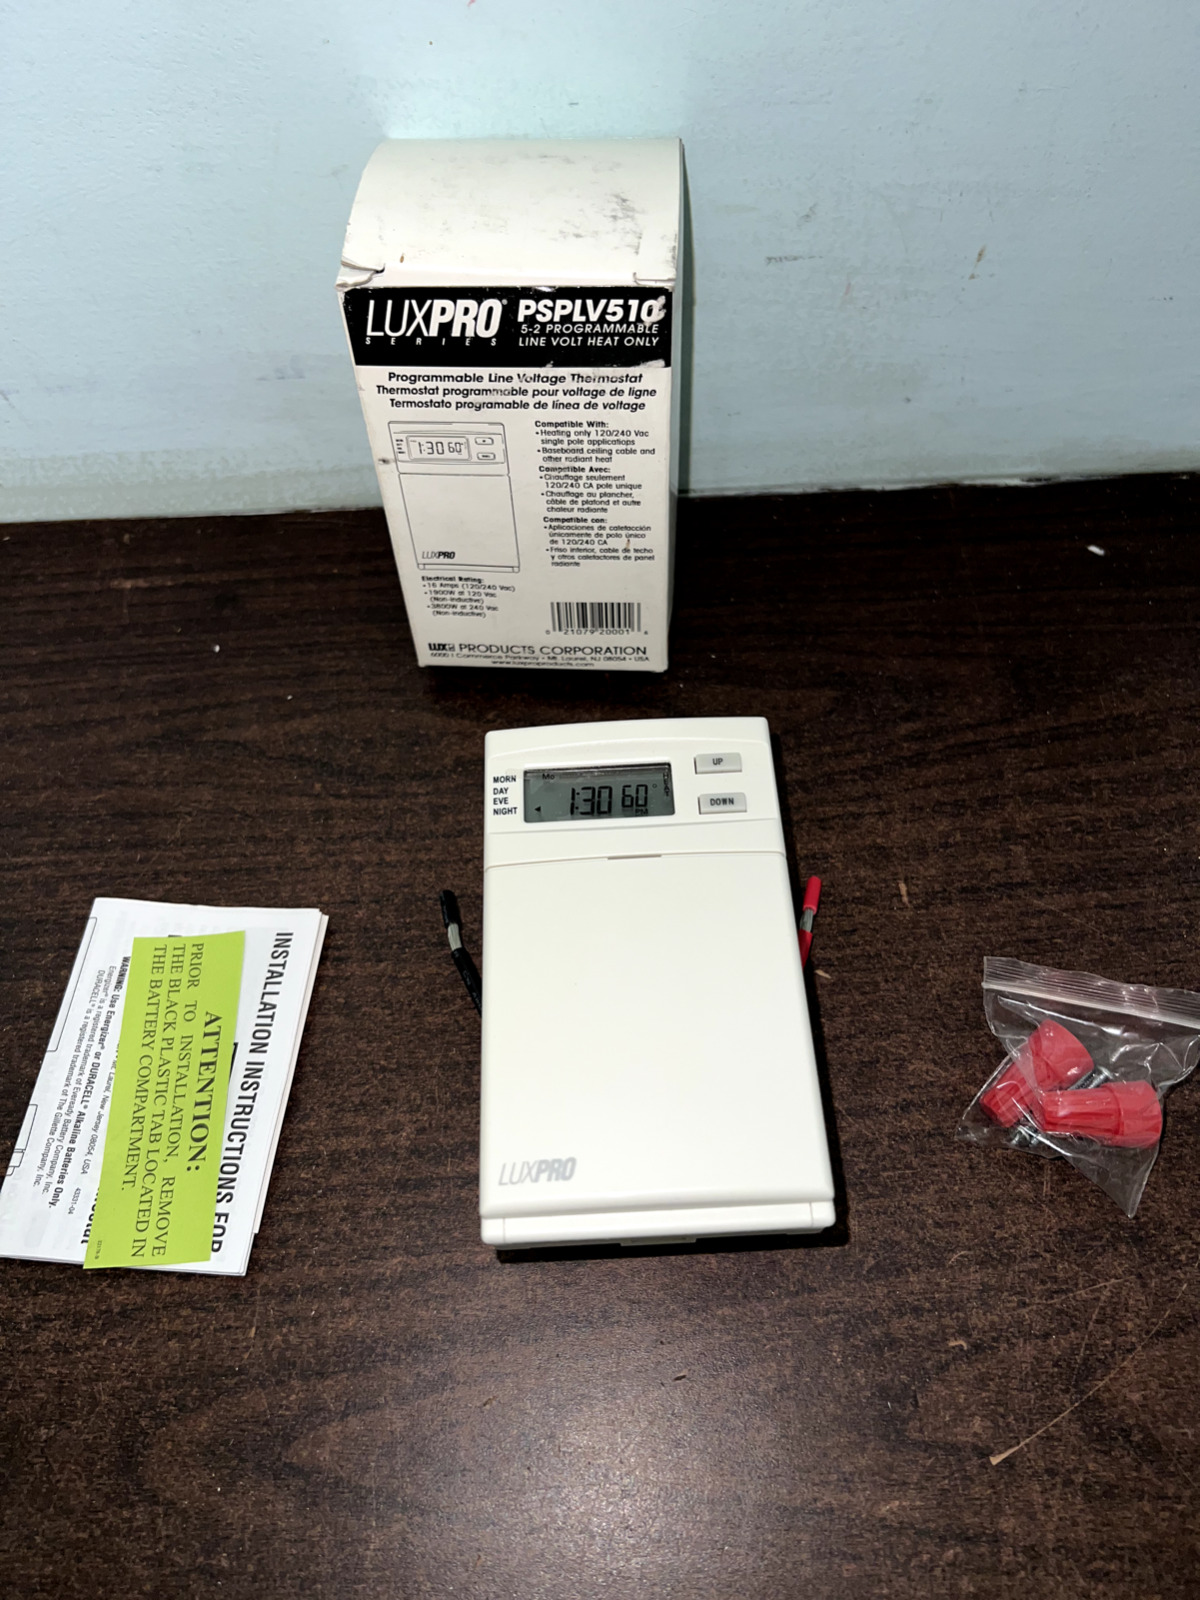 NEW LUXPRO PSPLV510 PROGRAMMABLE LINE VOLTAGE THERMOSTAT HEAT ONLY B300